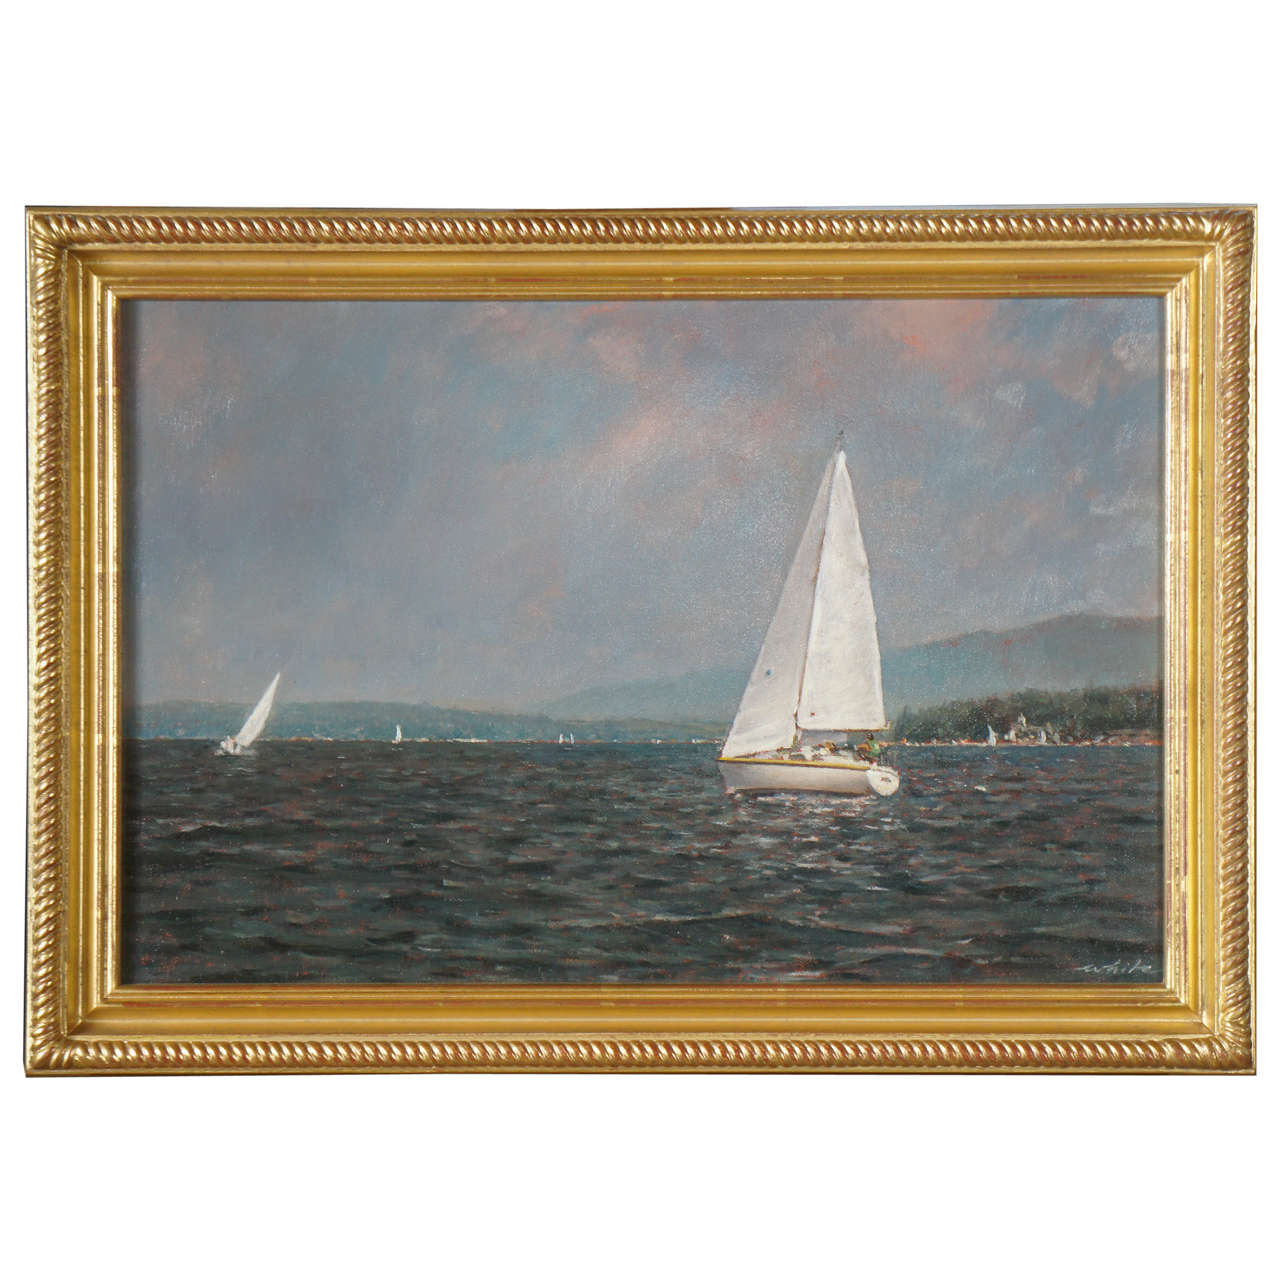 "Late Afternoon on the Hudson" by D. Francis White. For Sale